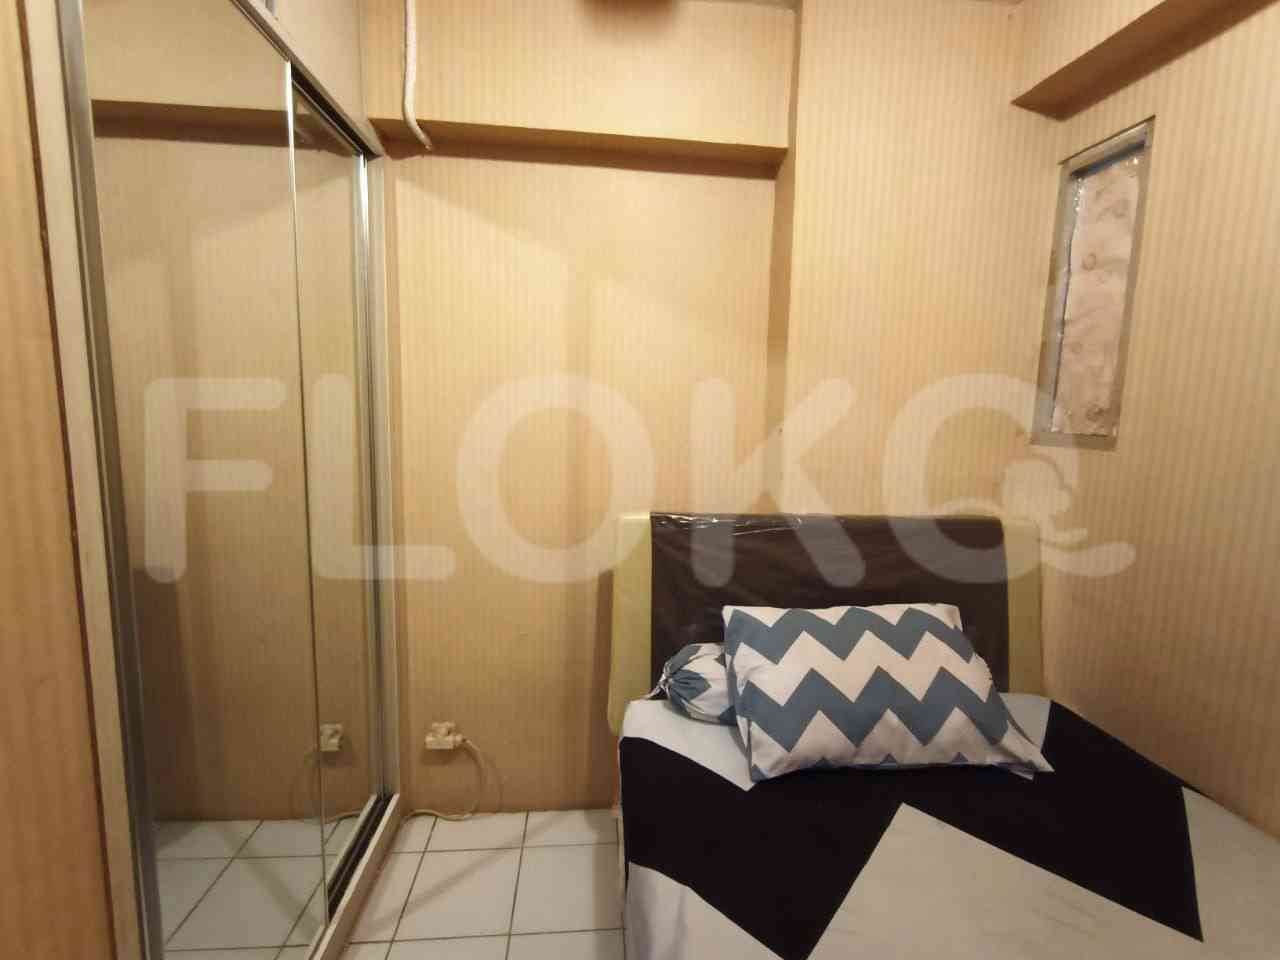 2 Bedroom on 15th Floor for Rent in Sentra Timur Residence - fca10f 4